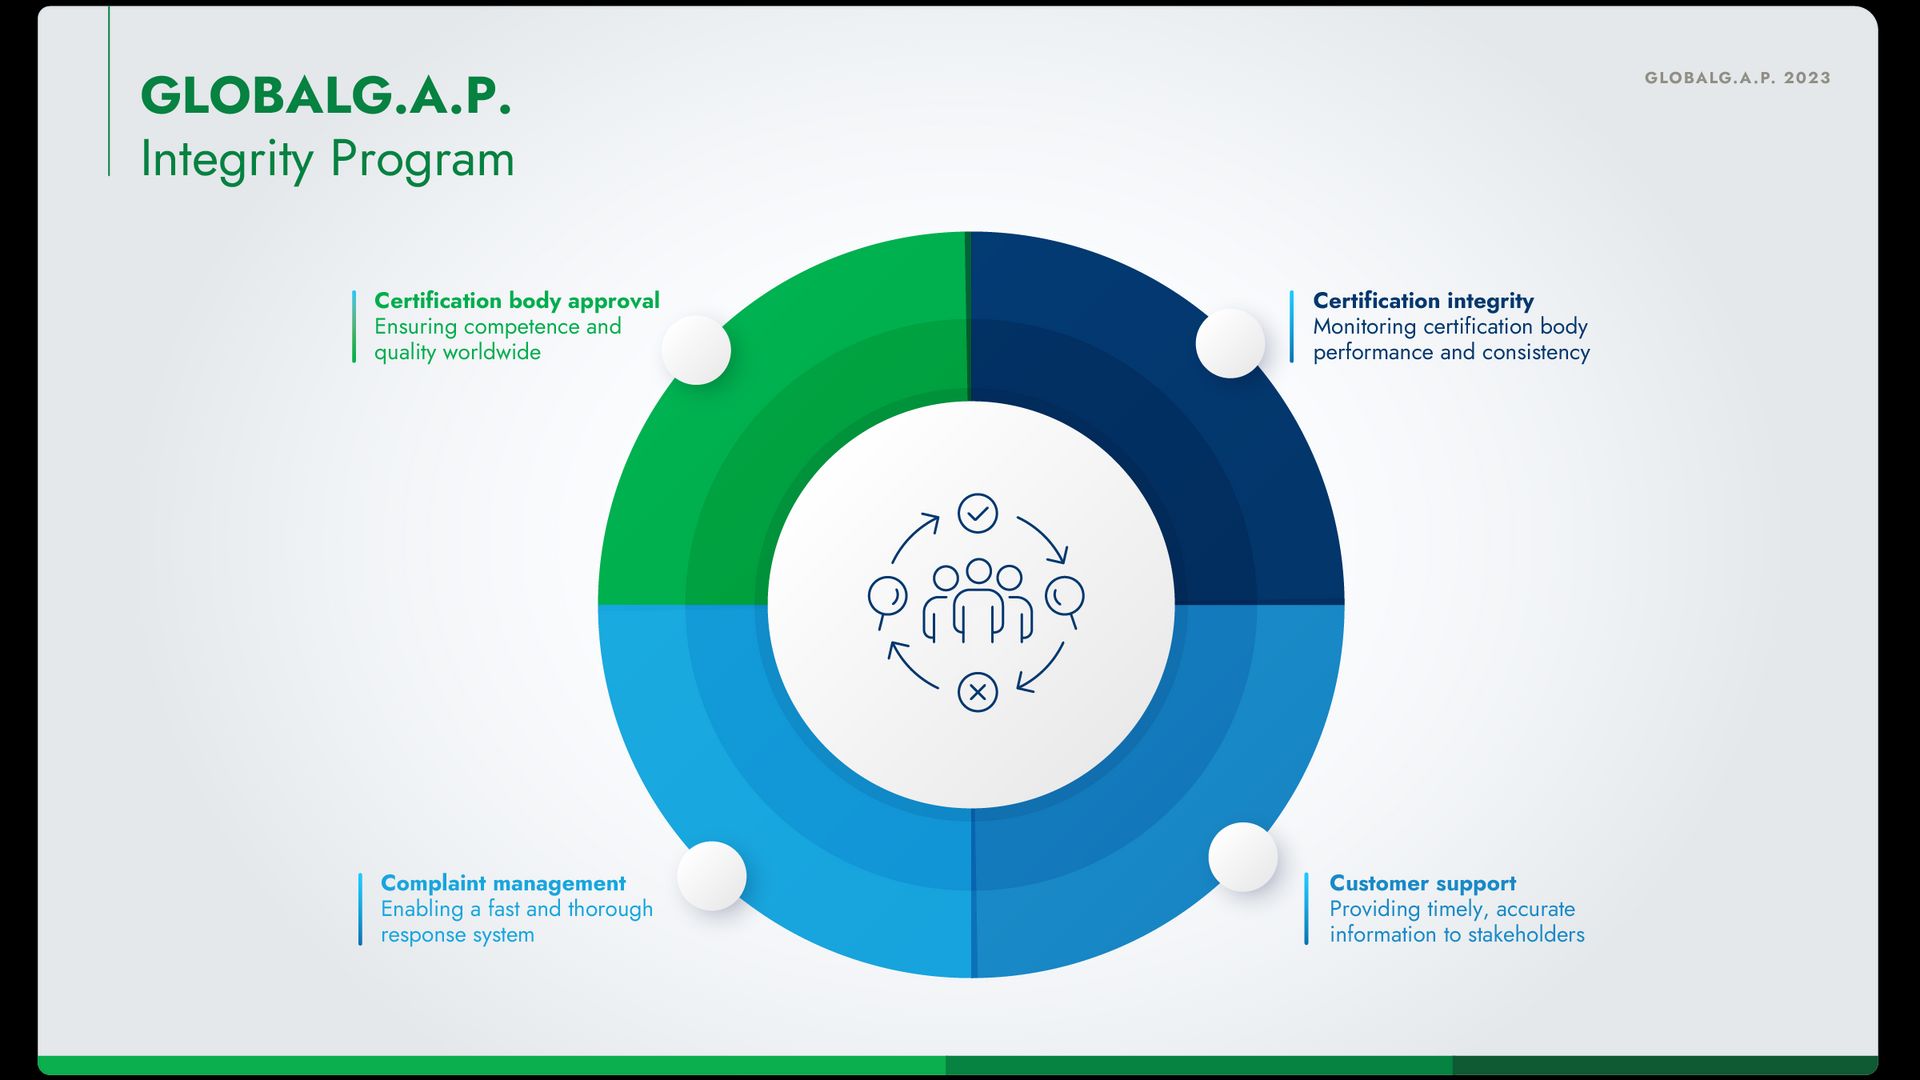 Infographic of the GLOBALG.A.P. Integrity Program activities